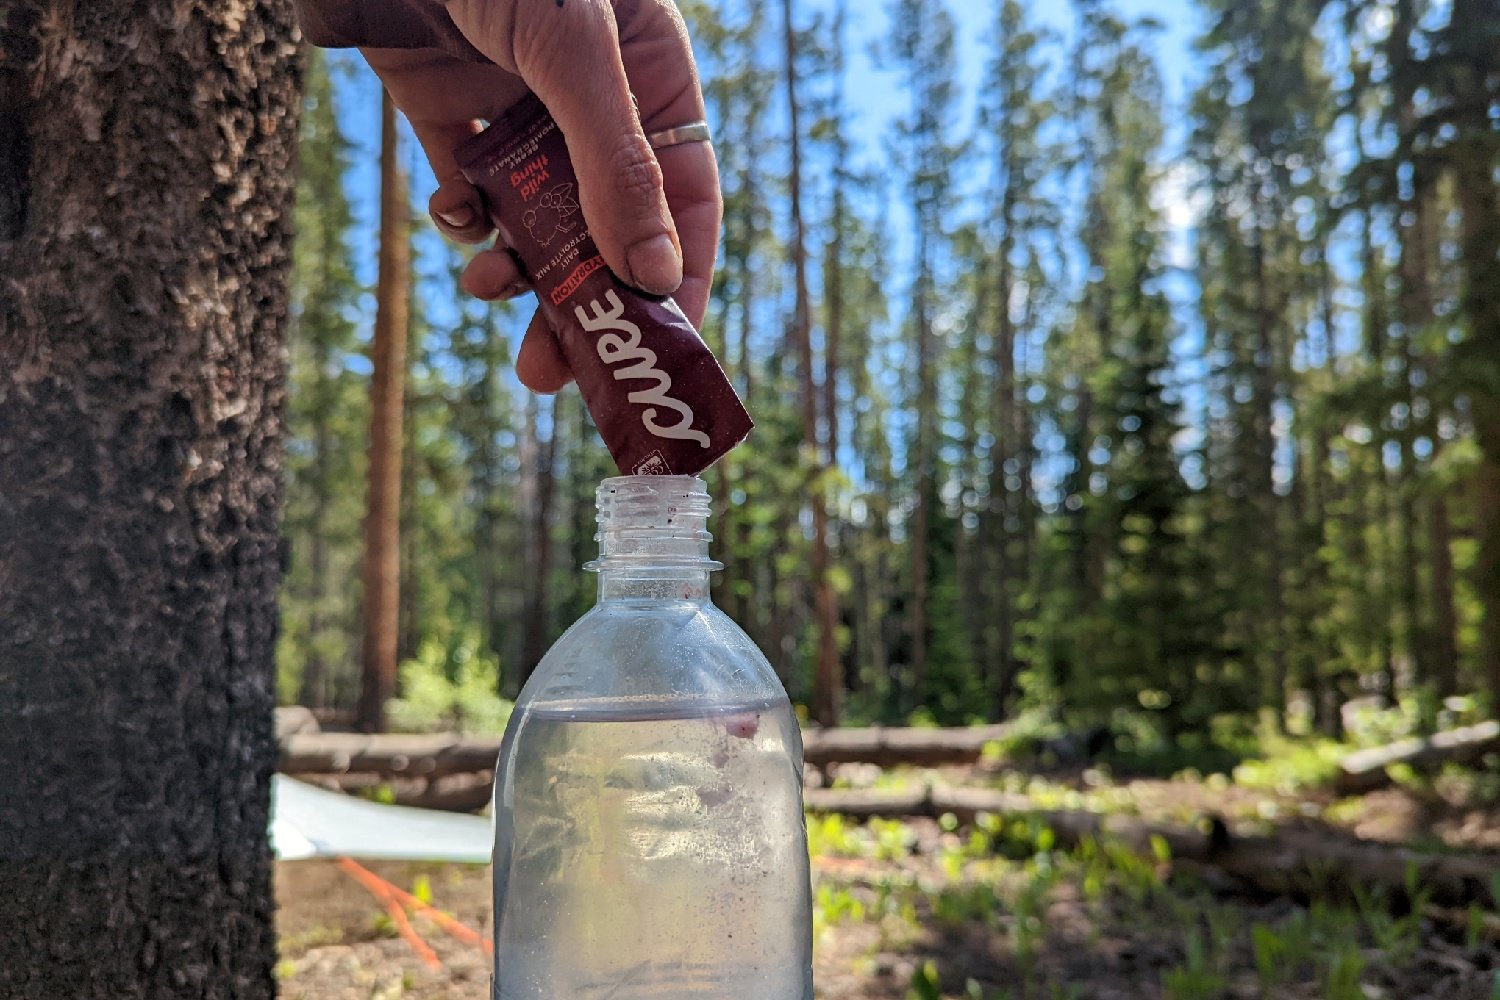 A packet of cure hydration mix being poured into a water bottle in a forest